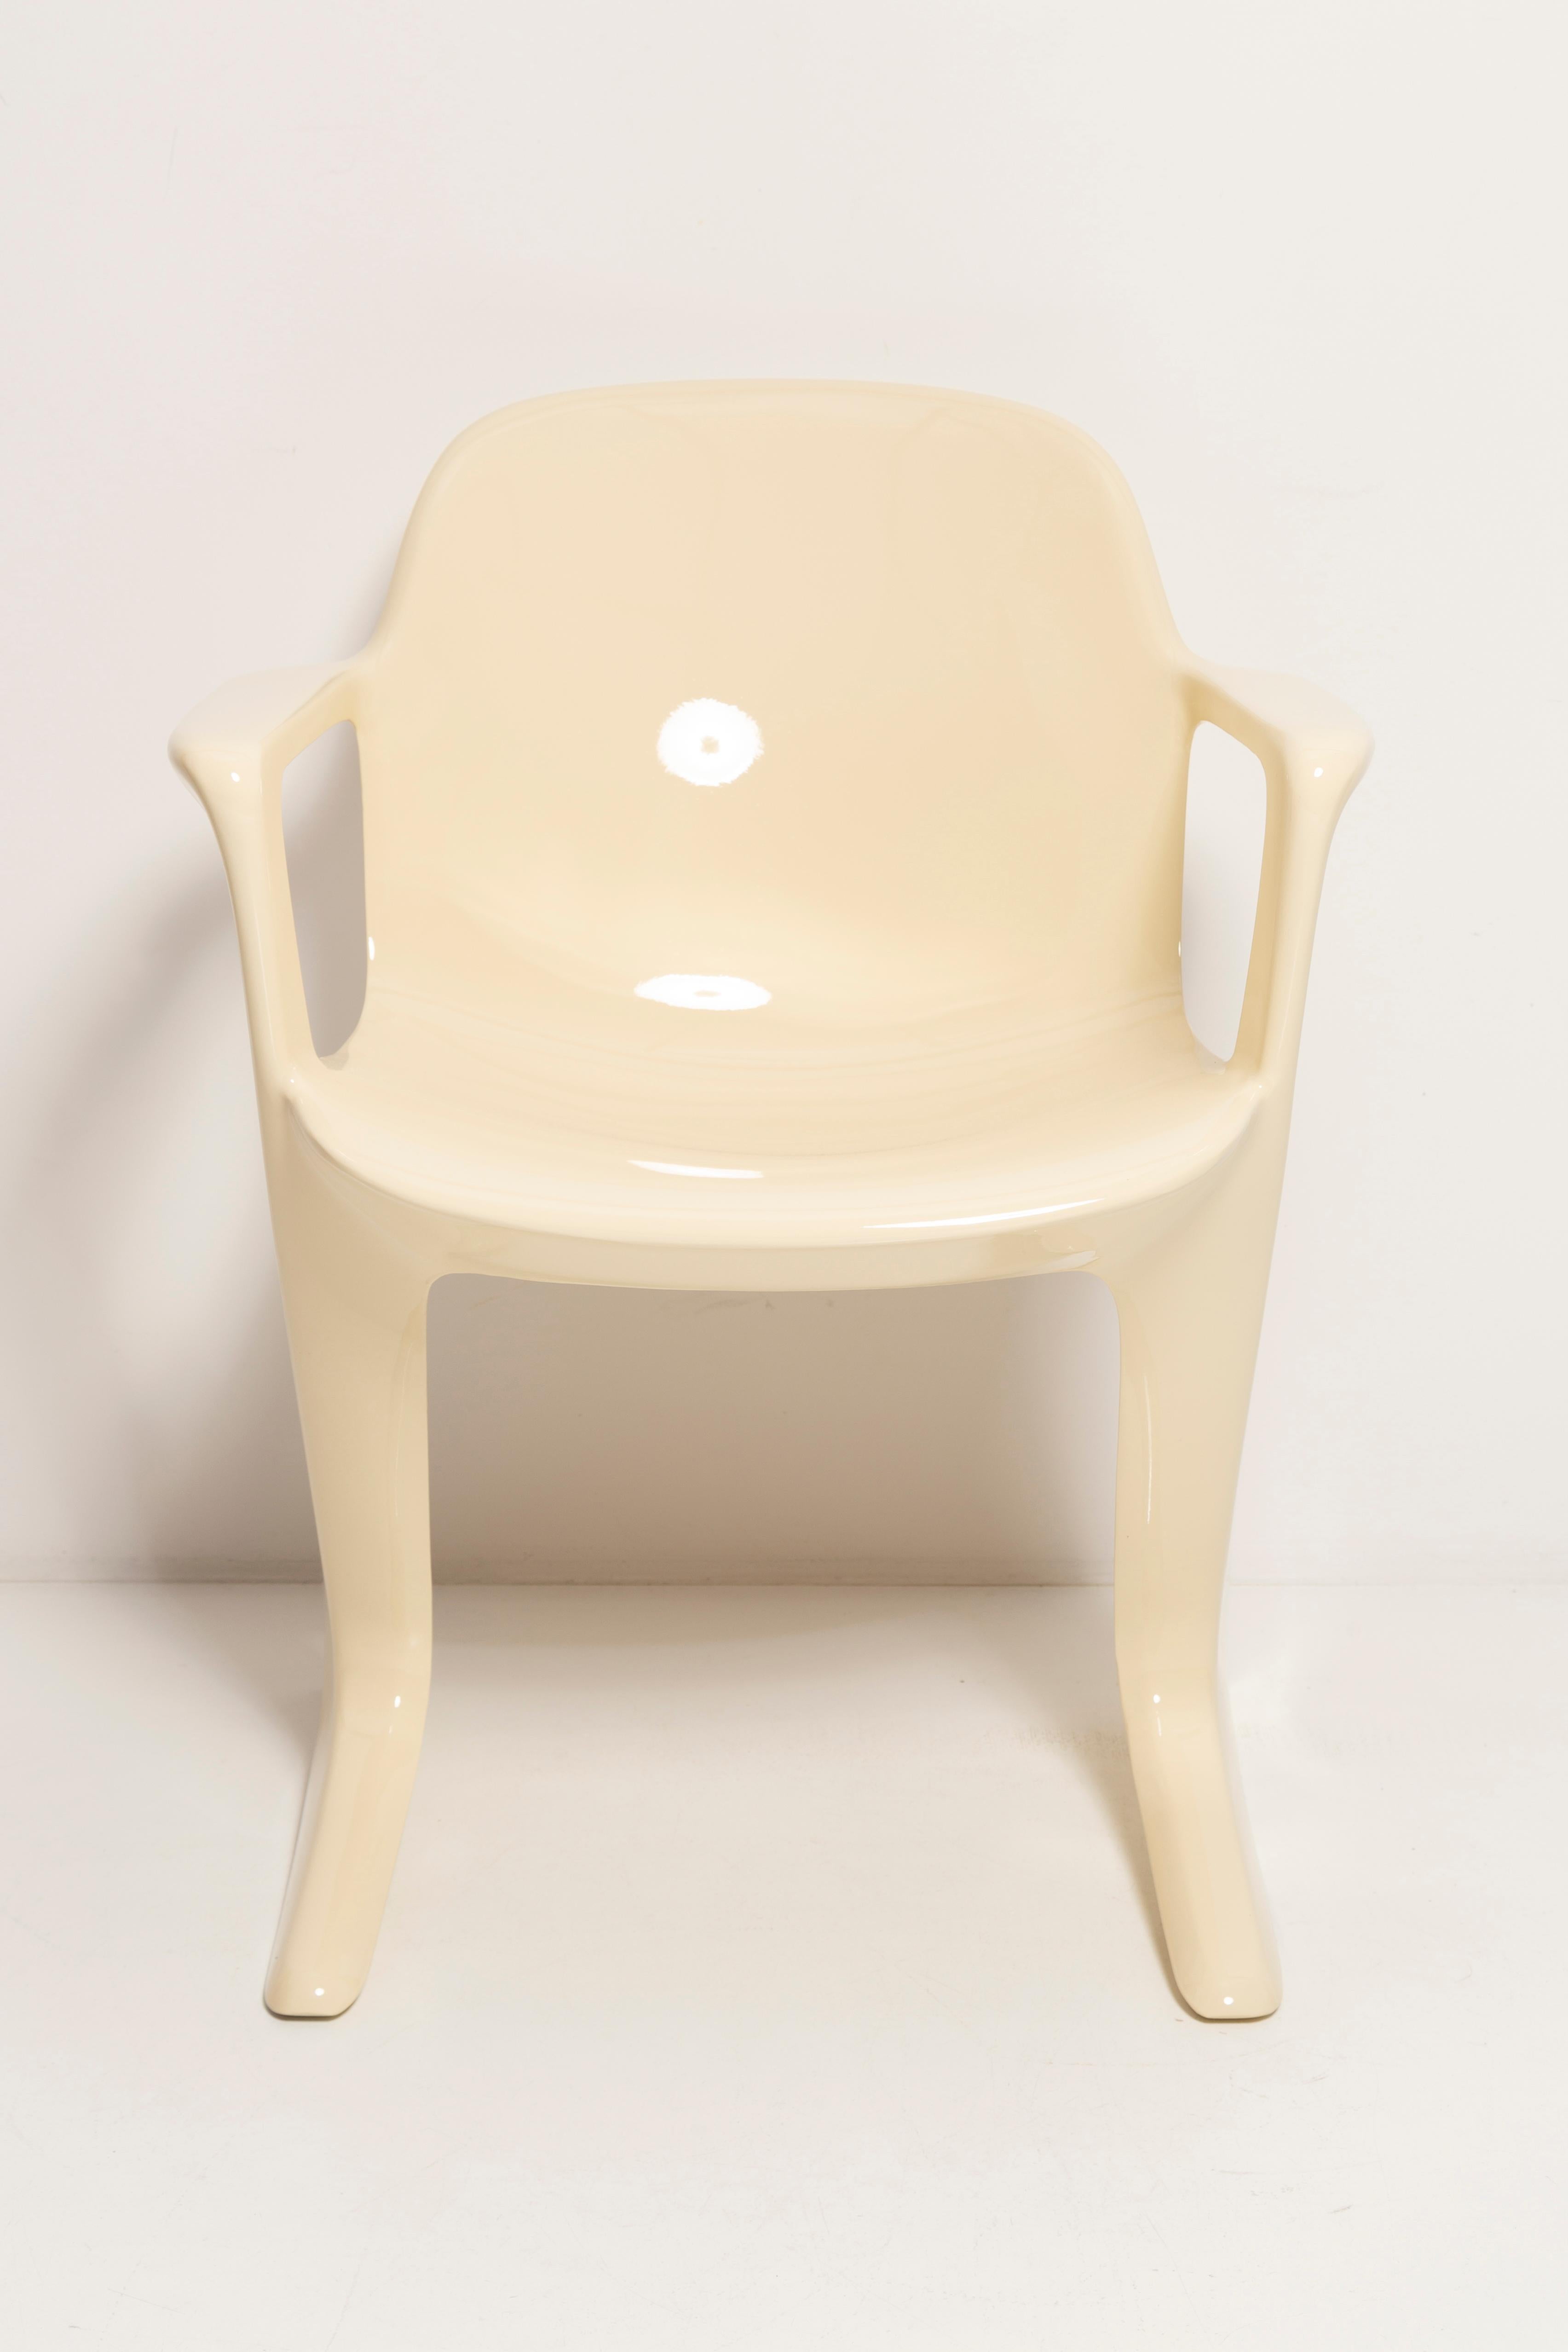 20th Century Mid-Century Light Beige Kangaroo Chair Designed by Ernst Moeckl, Germany, 1968 For Sale